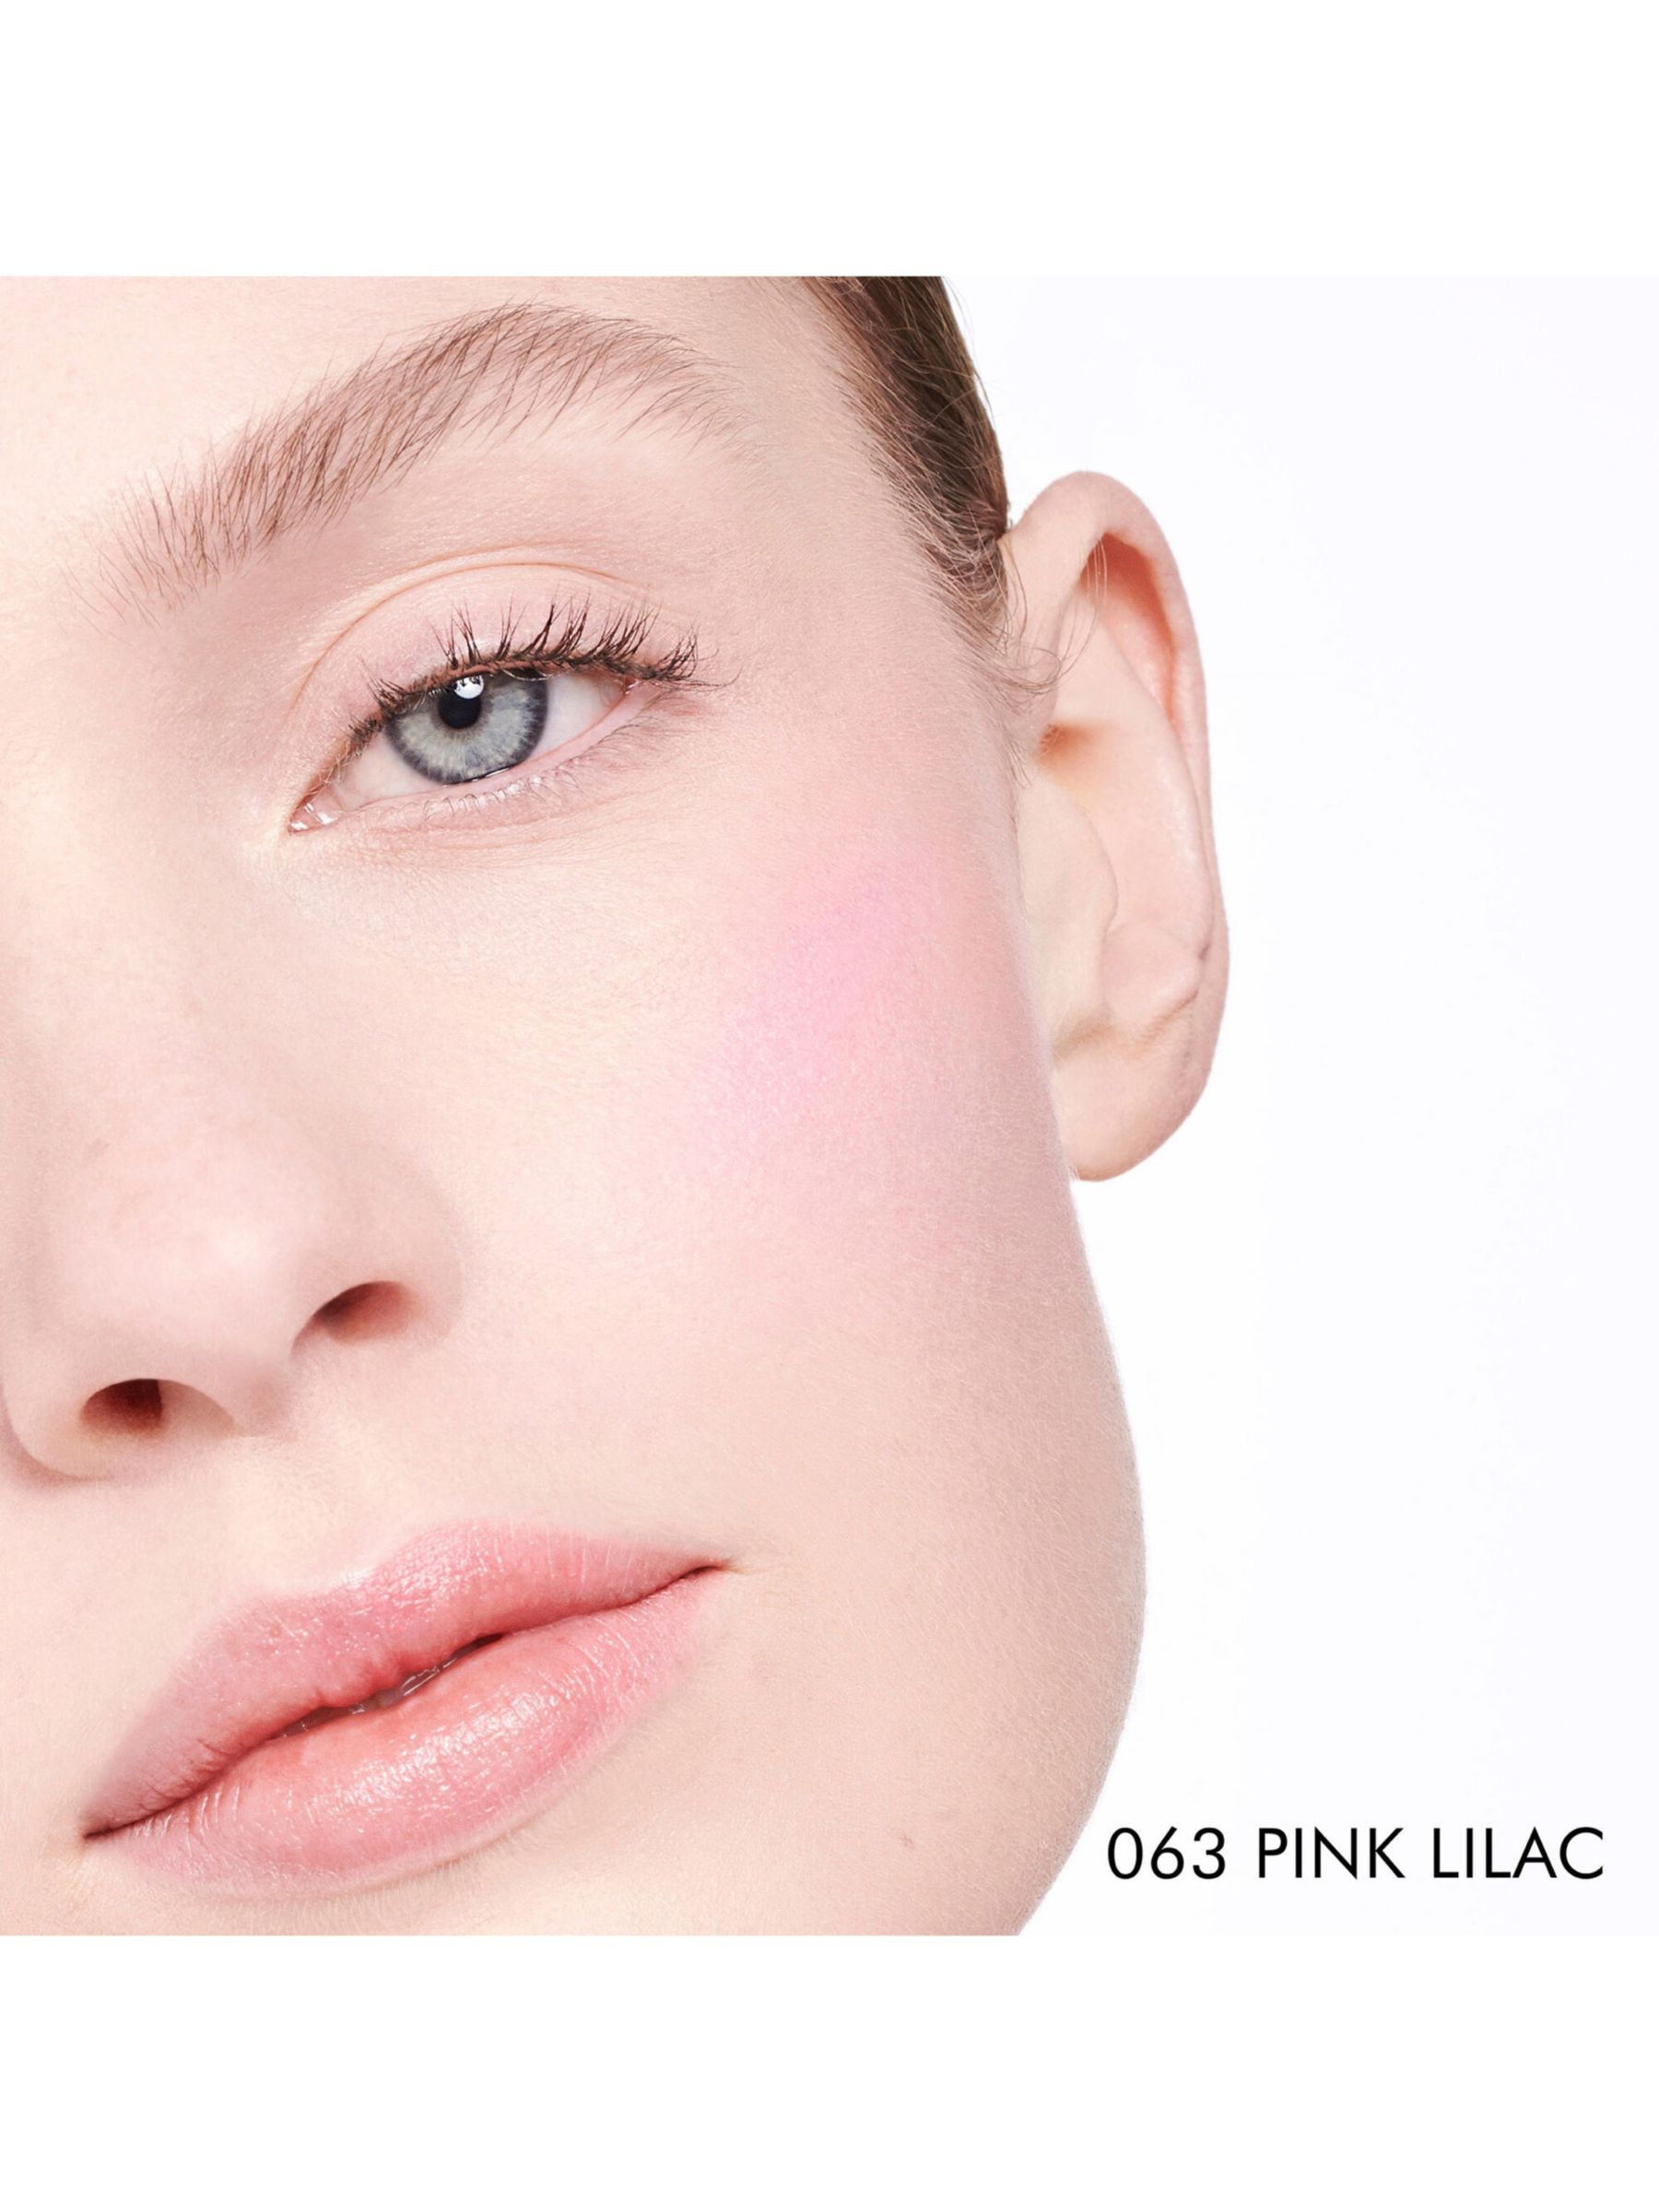 DIOR Backstage Limited Edition Rosy Glow, 063 Pink Lilac 2